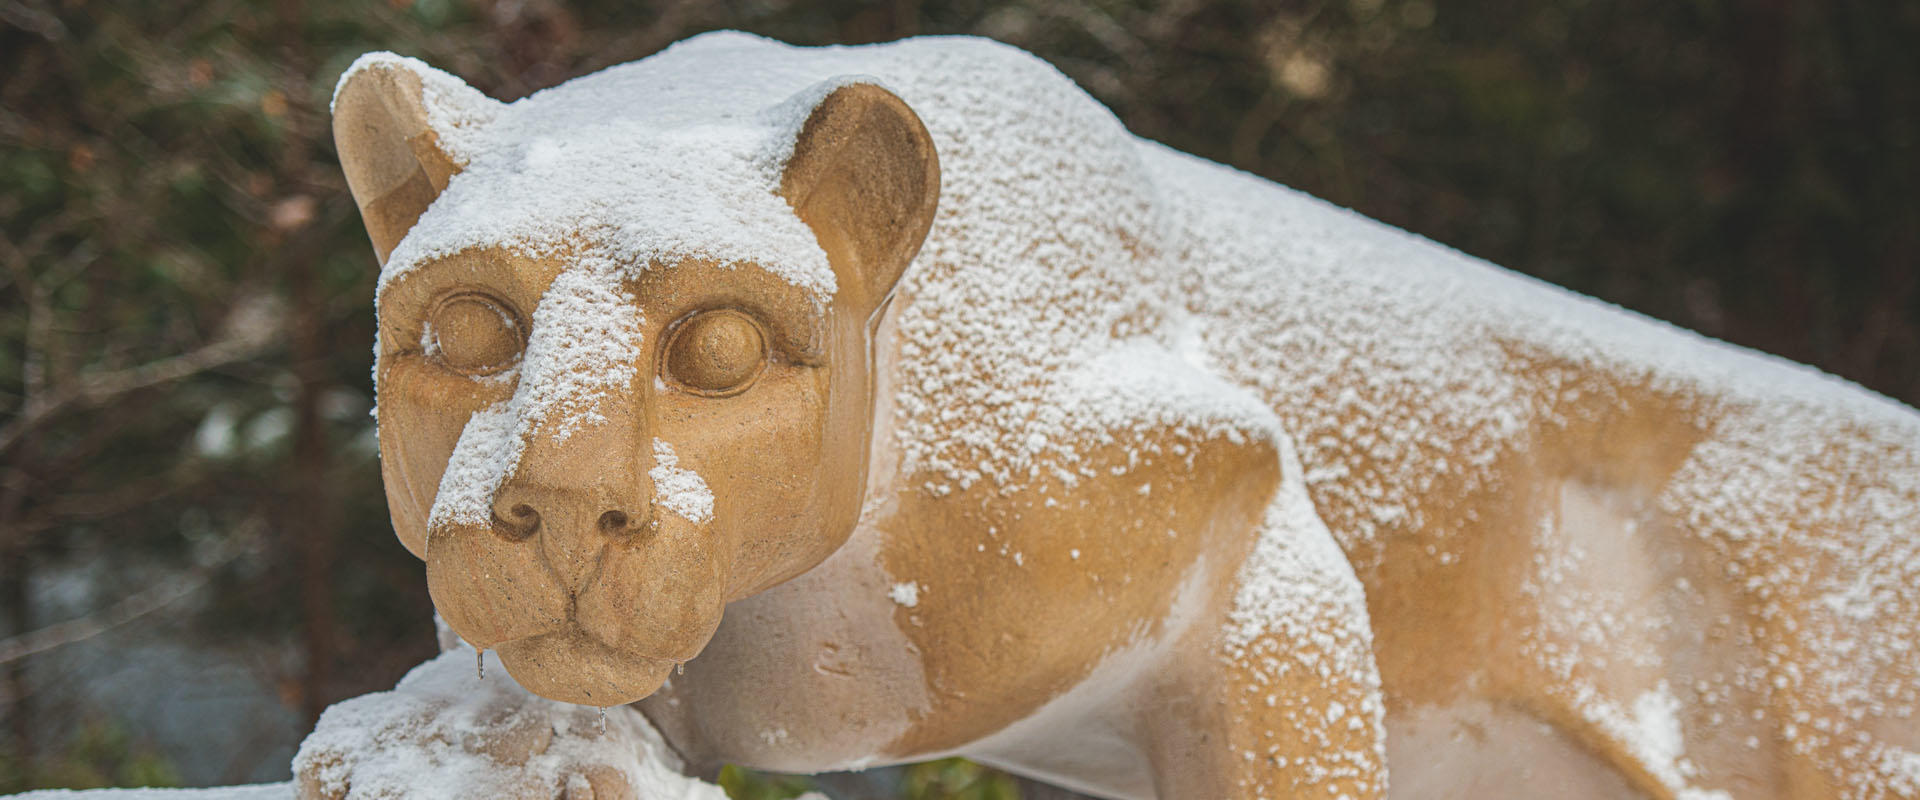 Nittany Lion Shrine dusted with snow